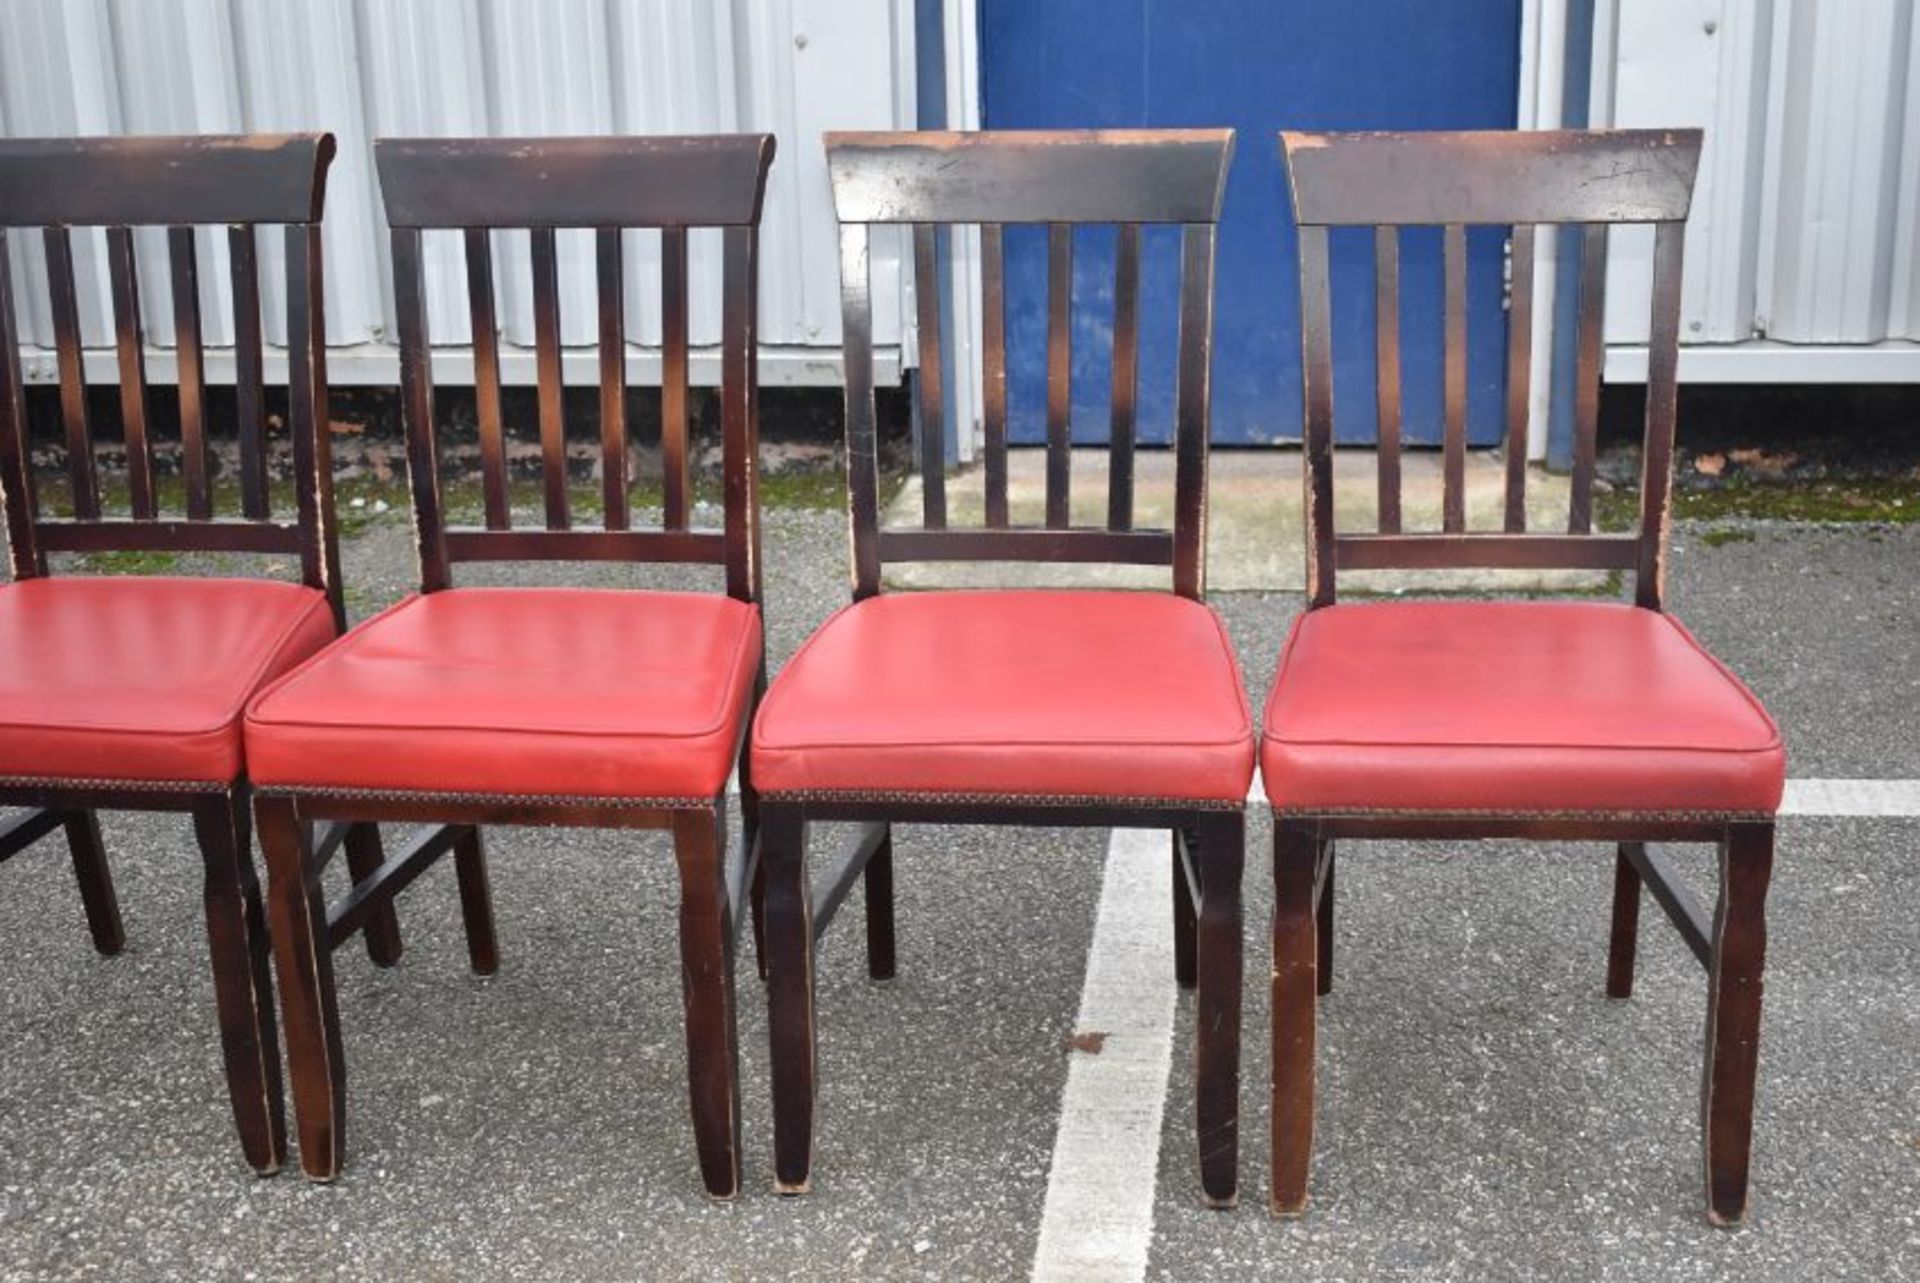 16 x Restaurant Dining Chairs With Dark Stained Wood Finish and Red Leather Seat Pads - Recently - Image 6 of 6